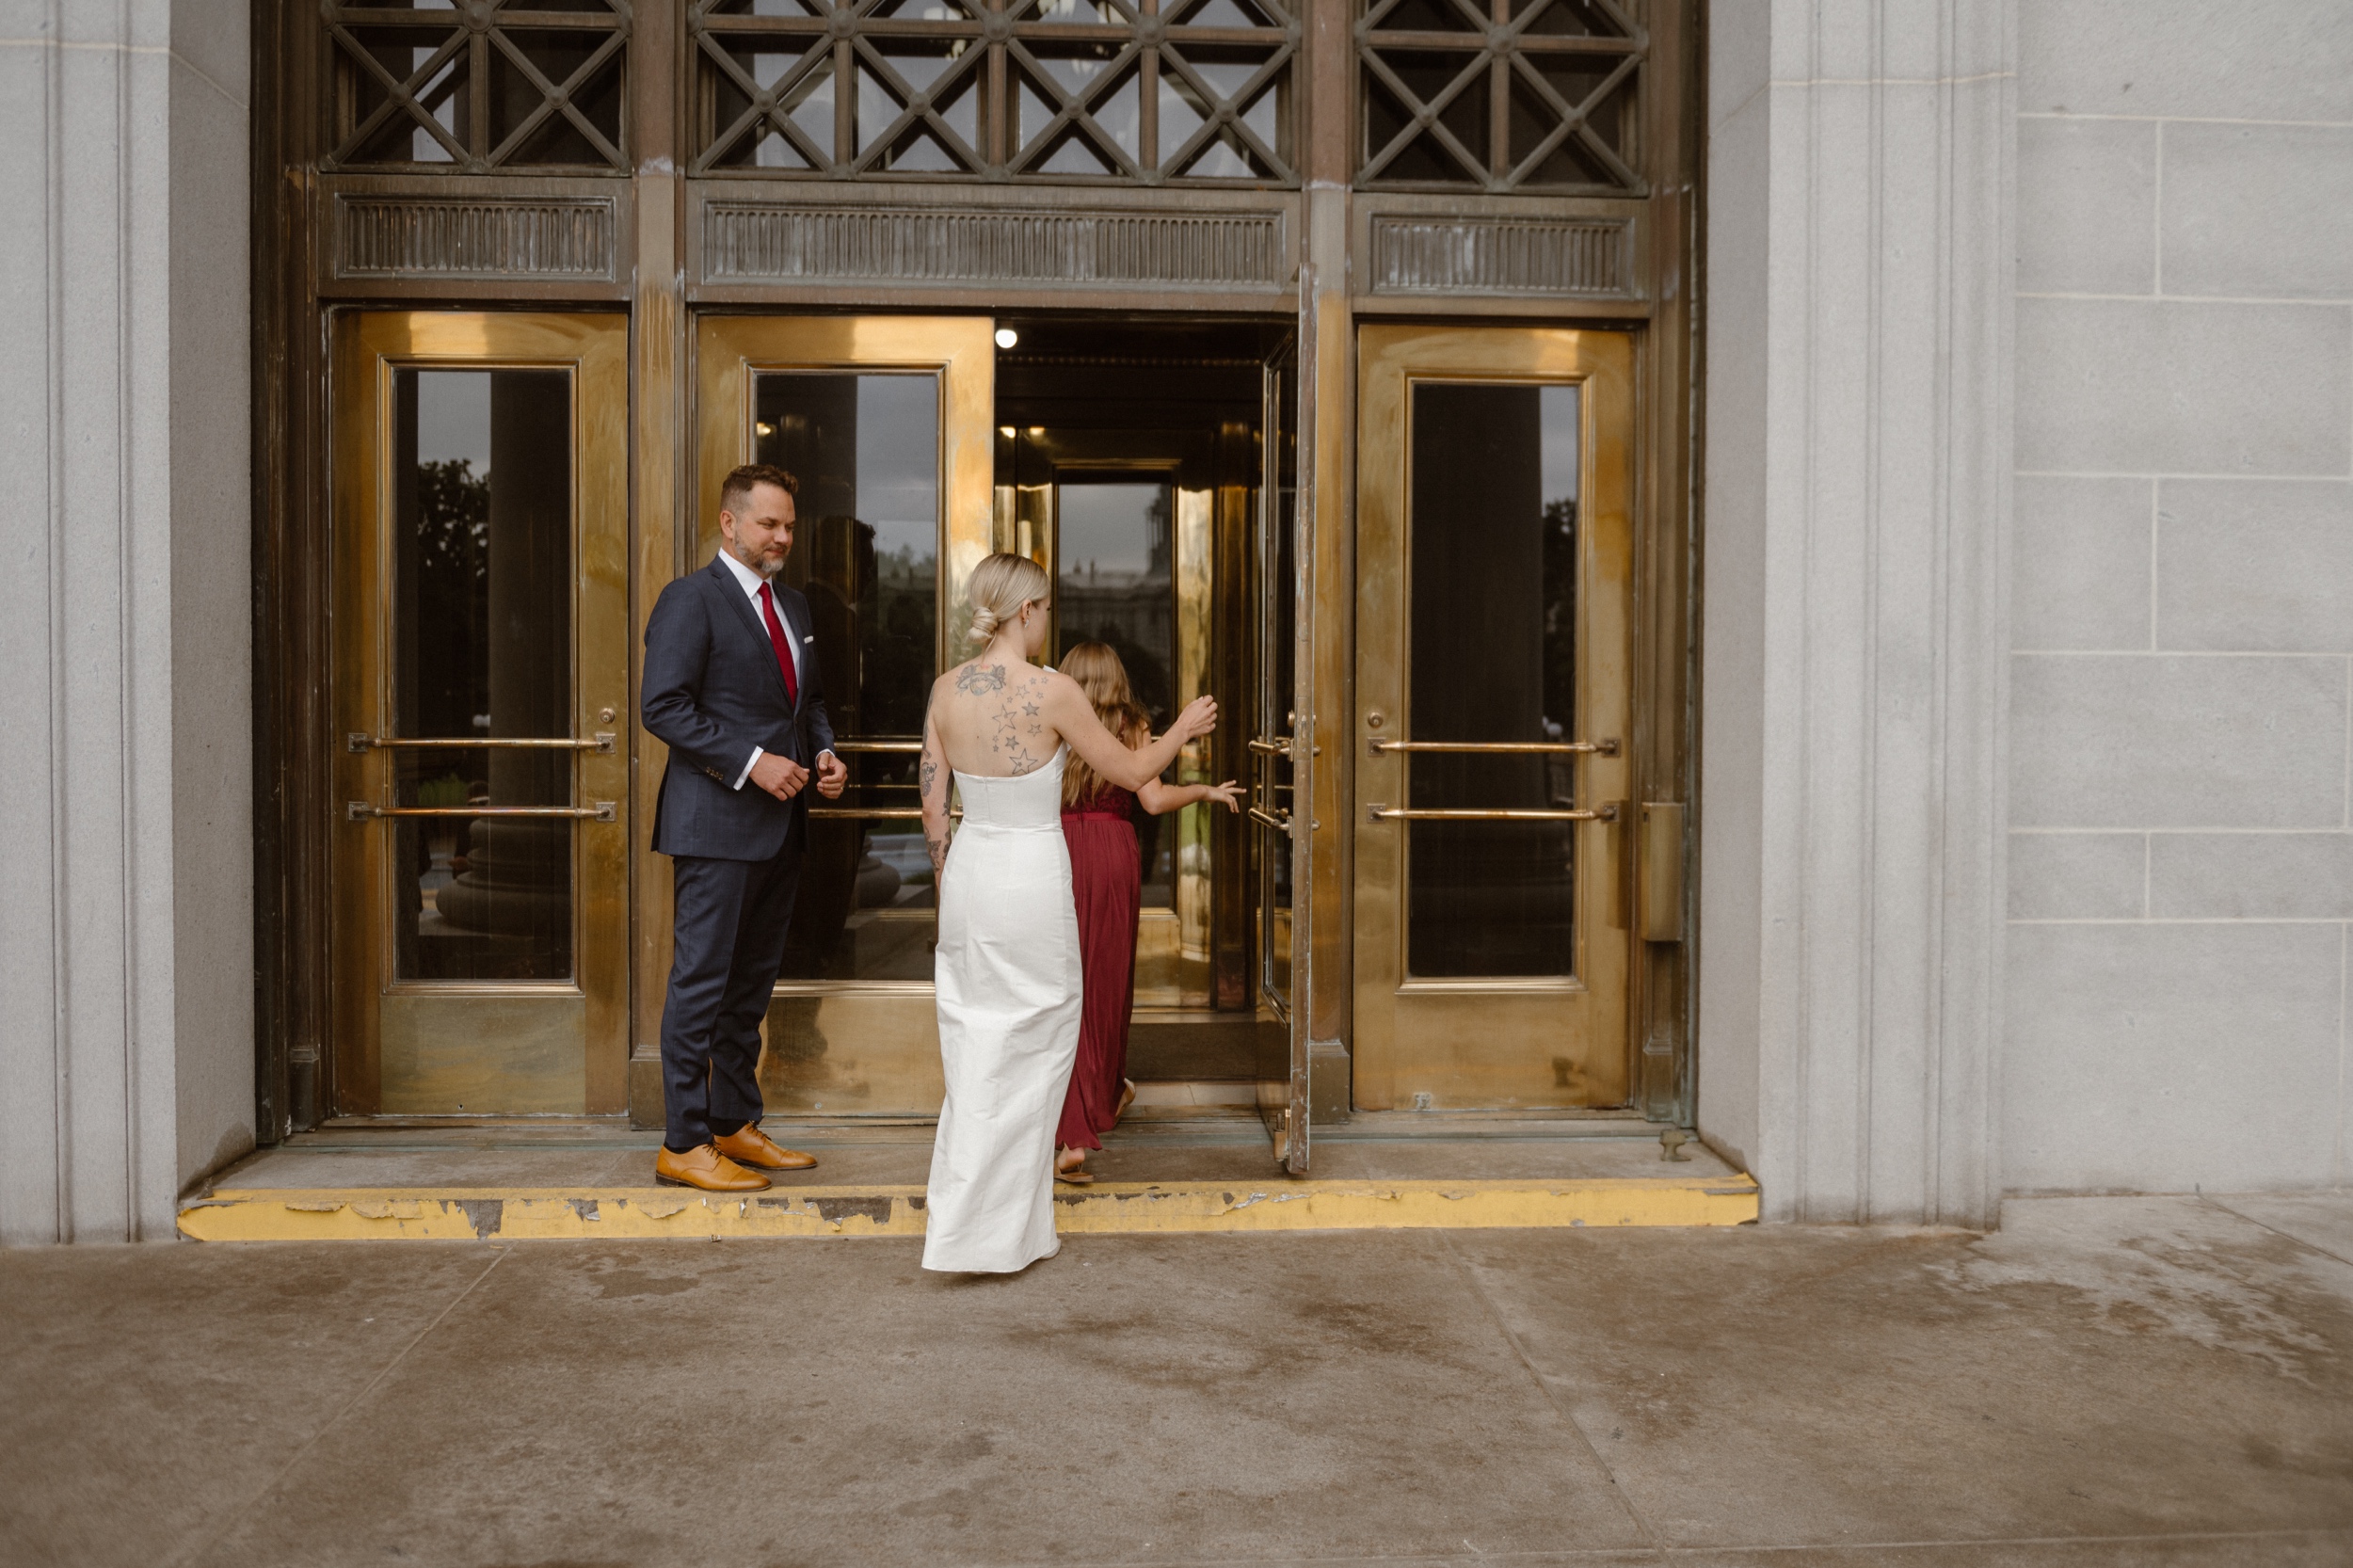 A candid photo of a bride and groom and a few of their wedding guests enter the Denver courthouse for their wedding. Photo by Colorado wedding photographer Ashley Joyce.